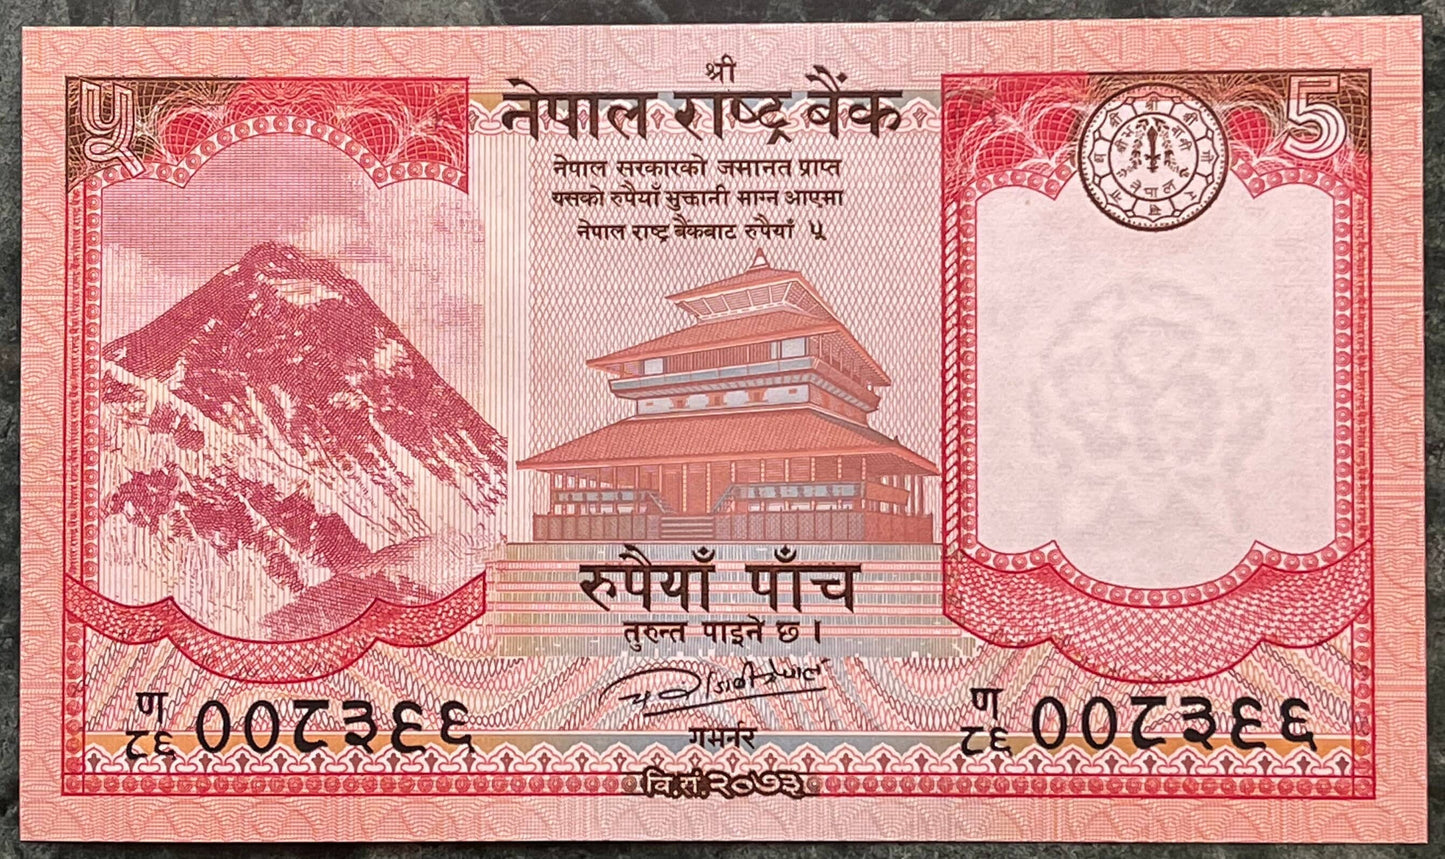 Wild Yak, Mount Everest, Kasthampandap Temple & Rhododendron 5 Rupees Nepal Authentic Banknote Money for Jewelry and Collage (Sagarmāthā)